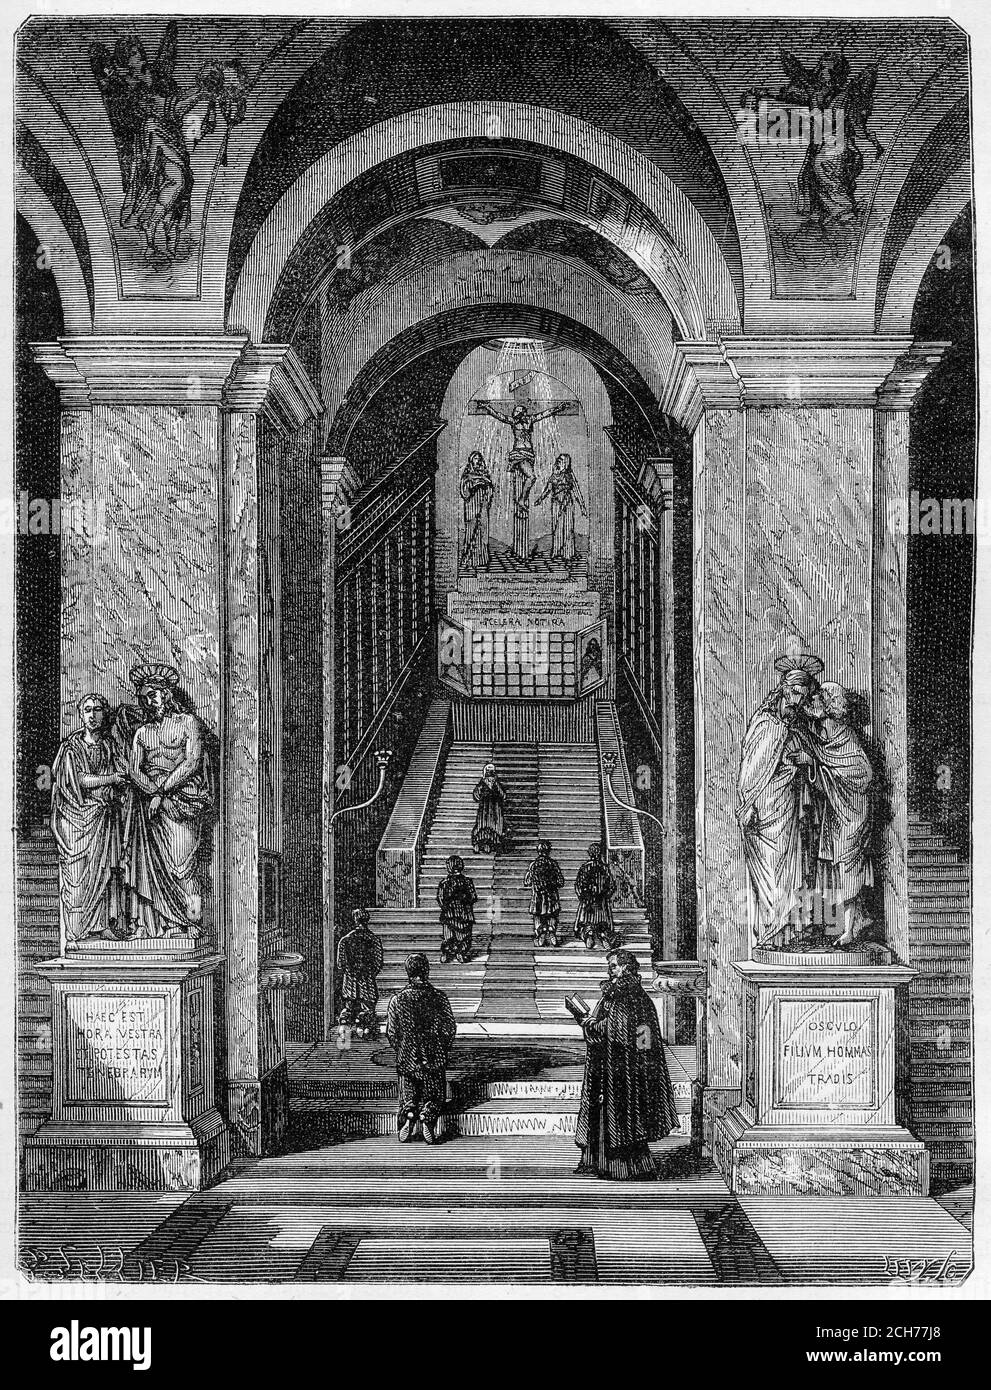 Engraving of the scala sancta, or the holy stairs in Rome, illustration from 'The history of Protestantism' by James Aitken Wylie (1808-1890), pub. 1878. According to Roman Catholic tradition, the Holy Stairs were the steps leading up to the praetorium of Pontius Pilate in Jerusalem on which Jesus Christ stepped on his way to trial during his Passion. Stock Photo